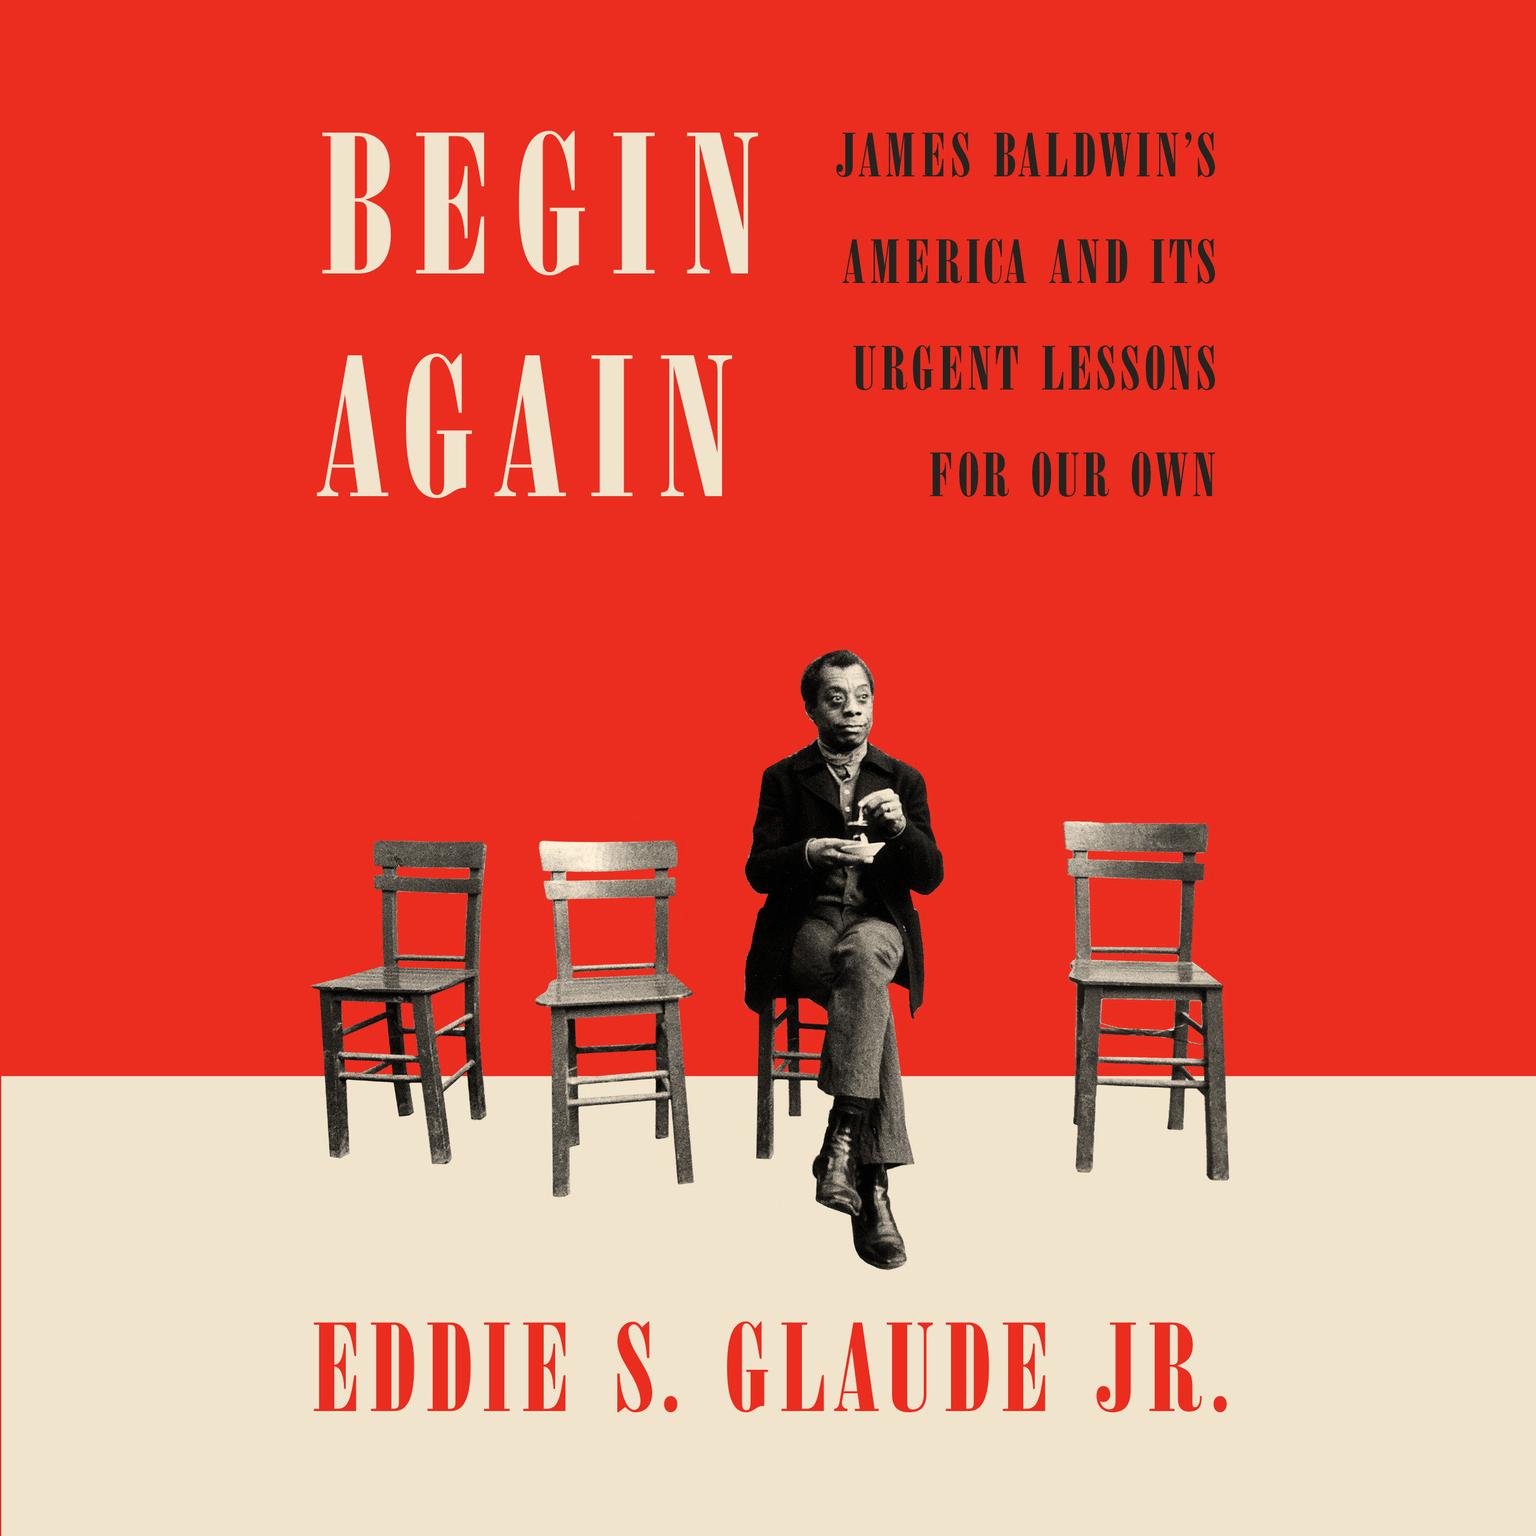 Begin Again: James Baldwins America and Its Urgent Lessons for Our Own Audiobook, by Eddie S. Glaude